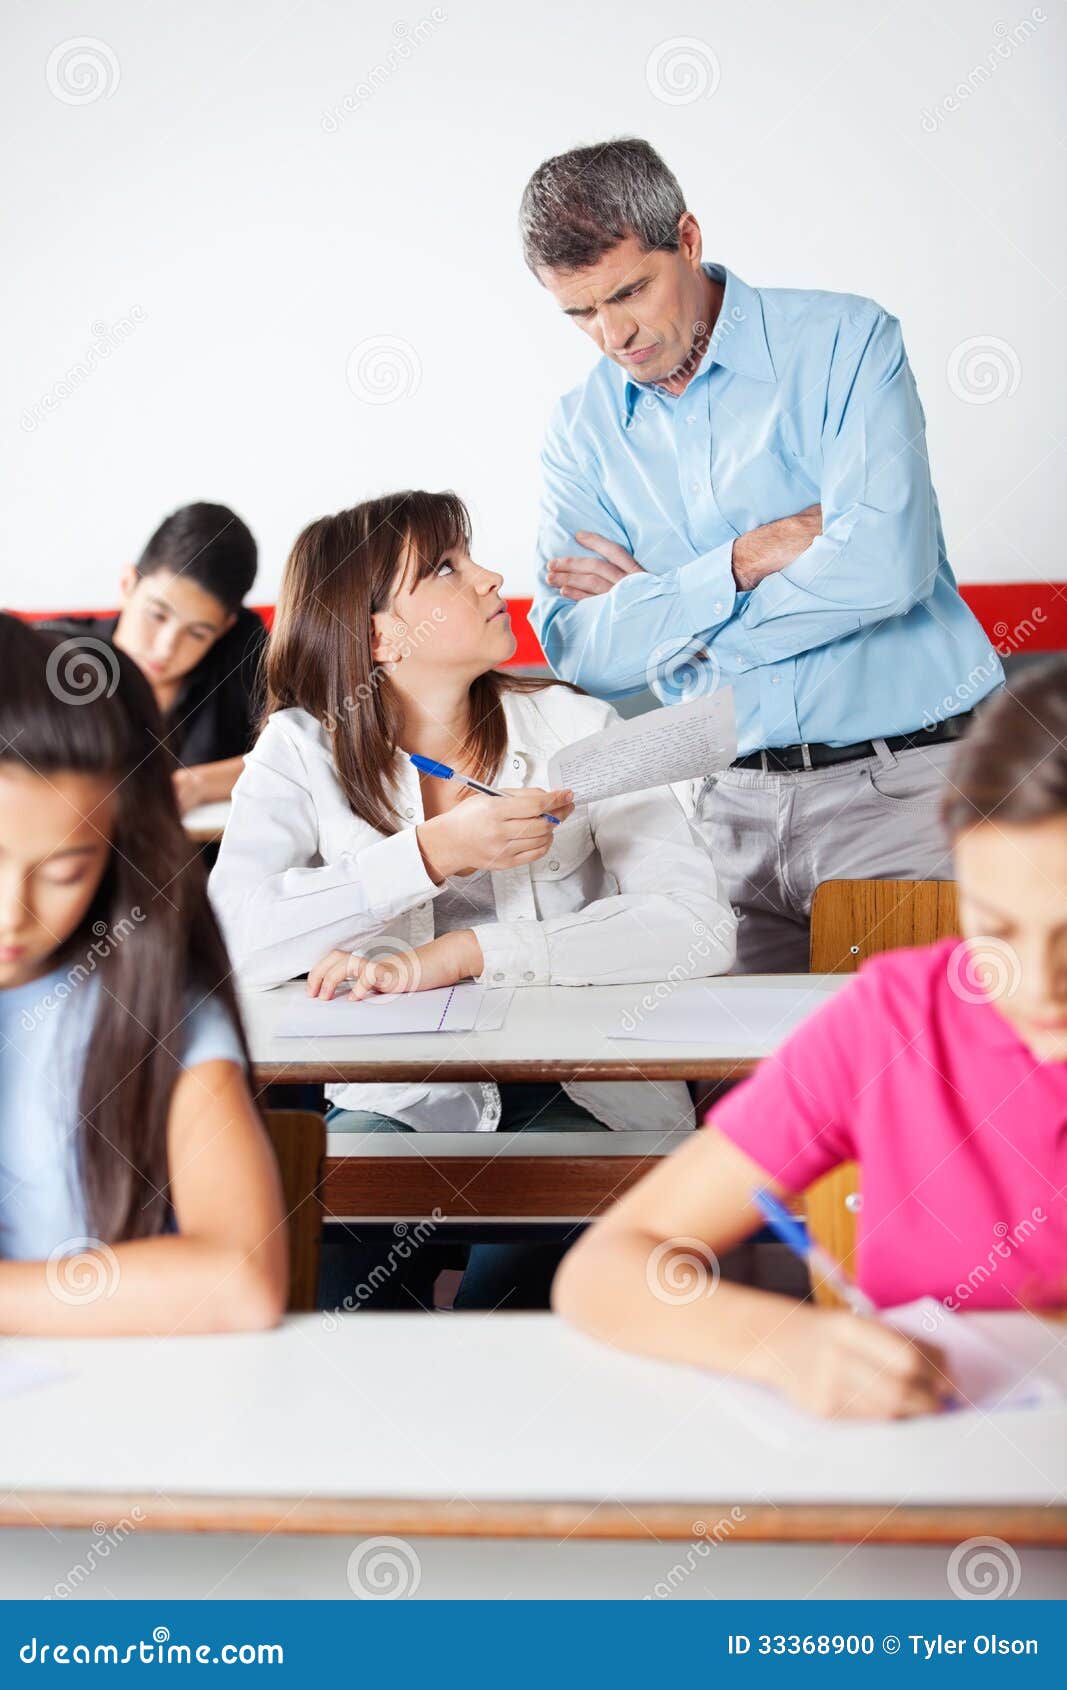 Angry Teacher Looking At Student Stock Photo - Image: 33368900